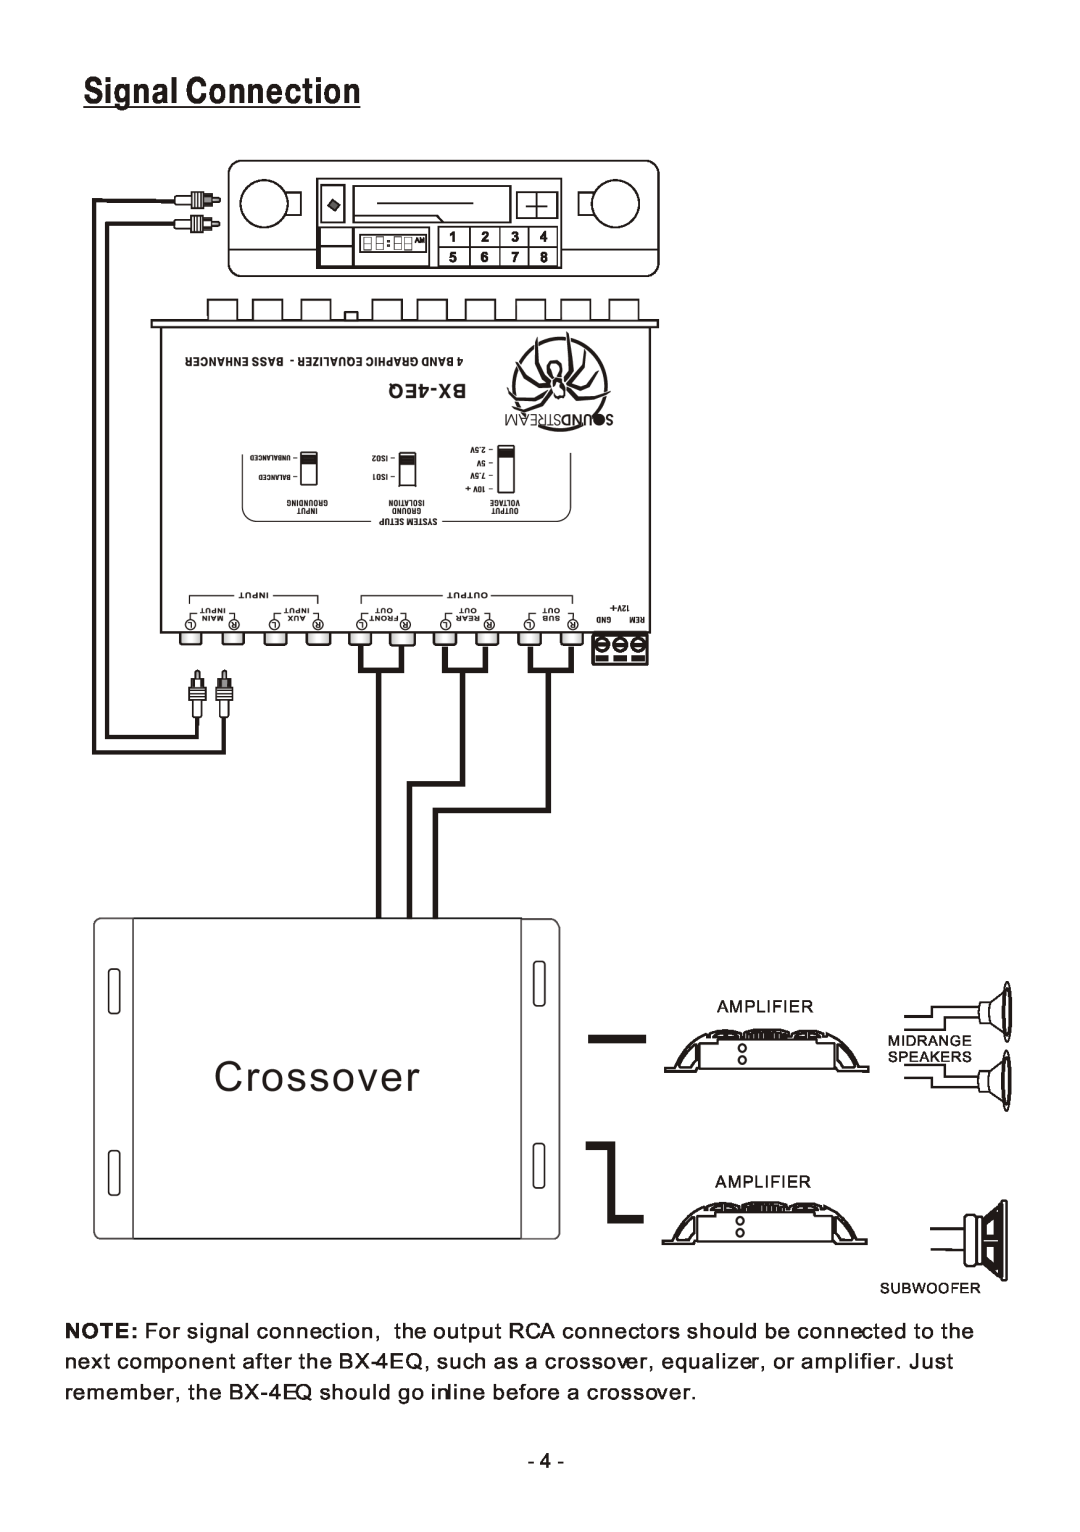 Soundstream Technologies BX-4EQ owner manual Crossover, Signal Connection, Amplifier, Midrange Speakers, Subwoofer 